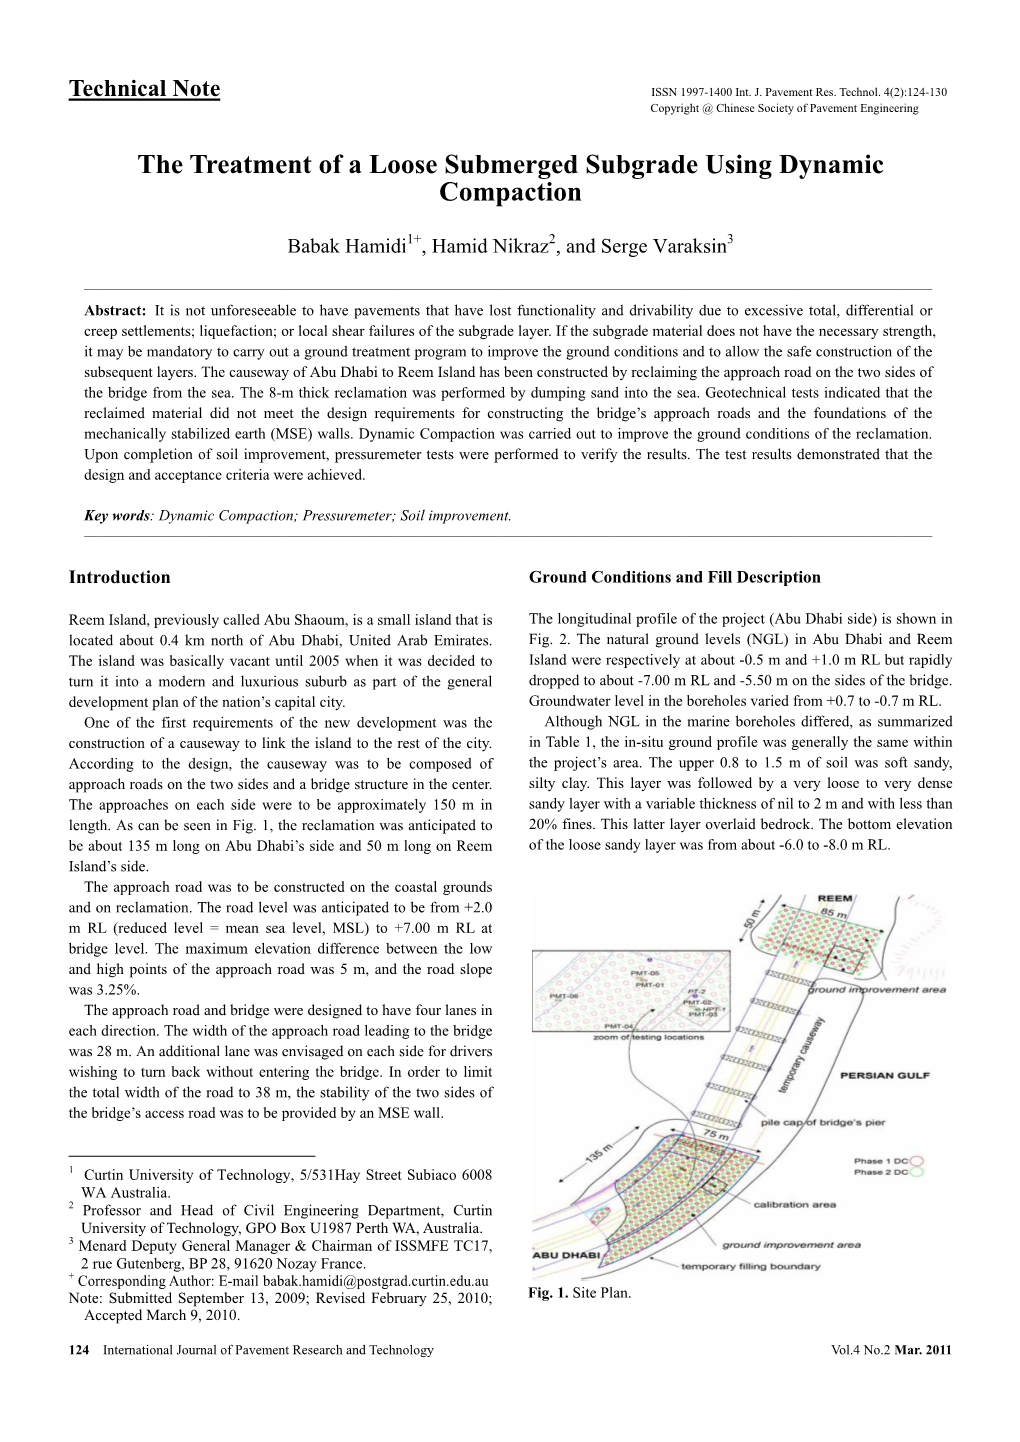 The Treatment of a Loose Submerged Subgrade Using Dynamic Compaction